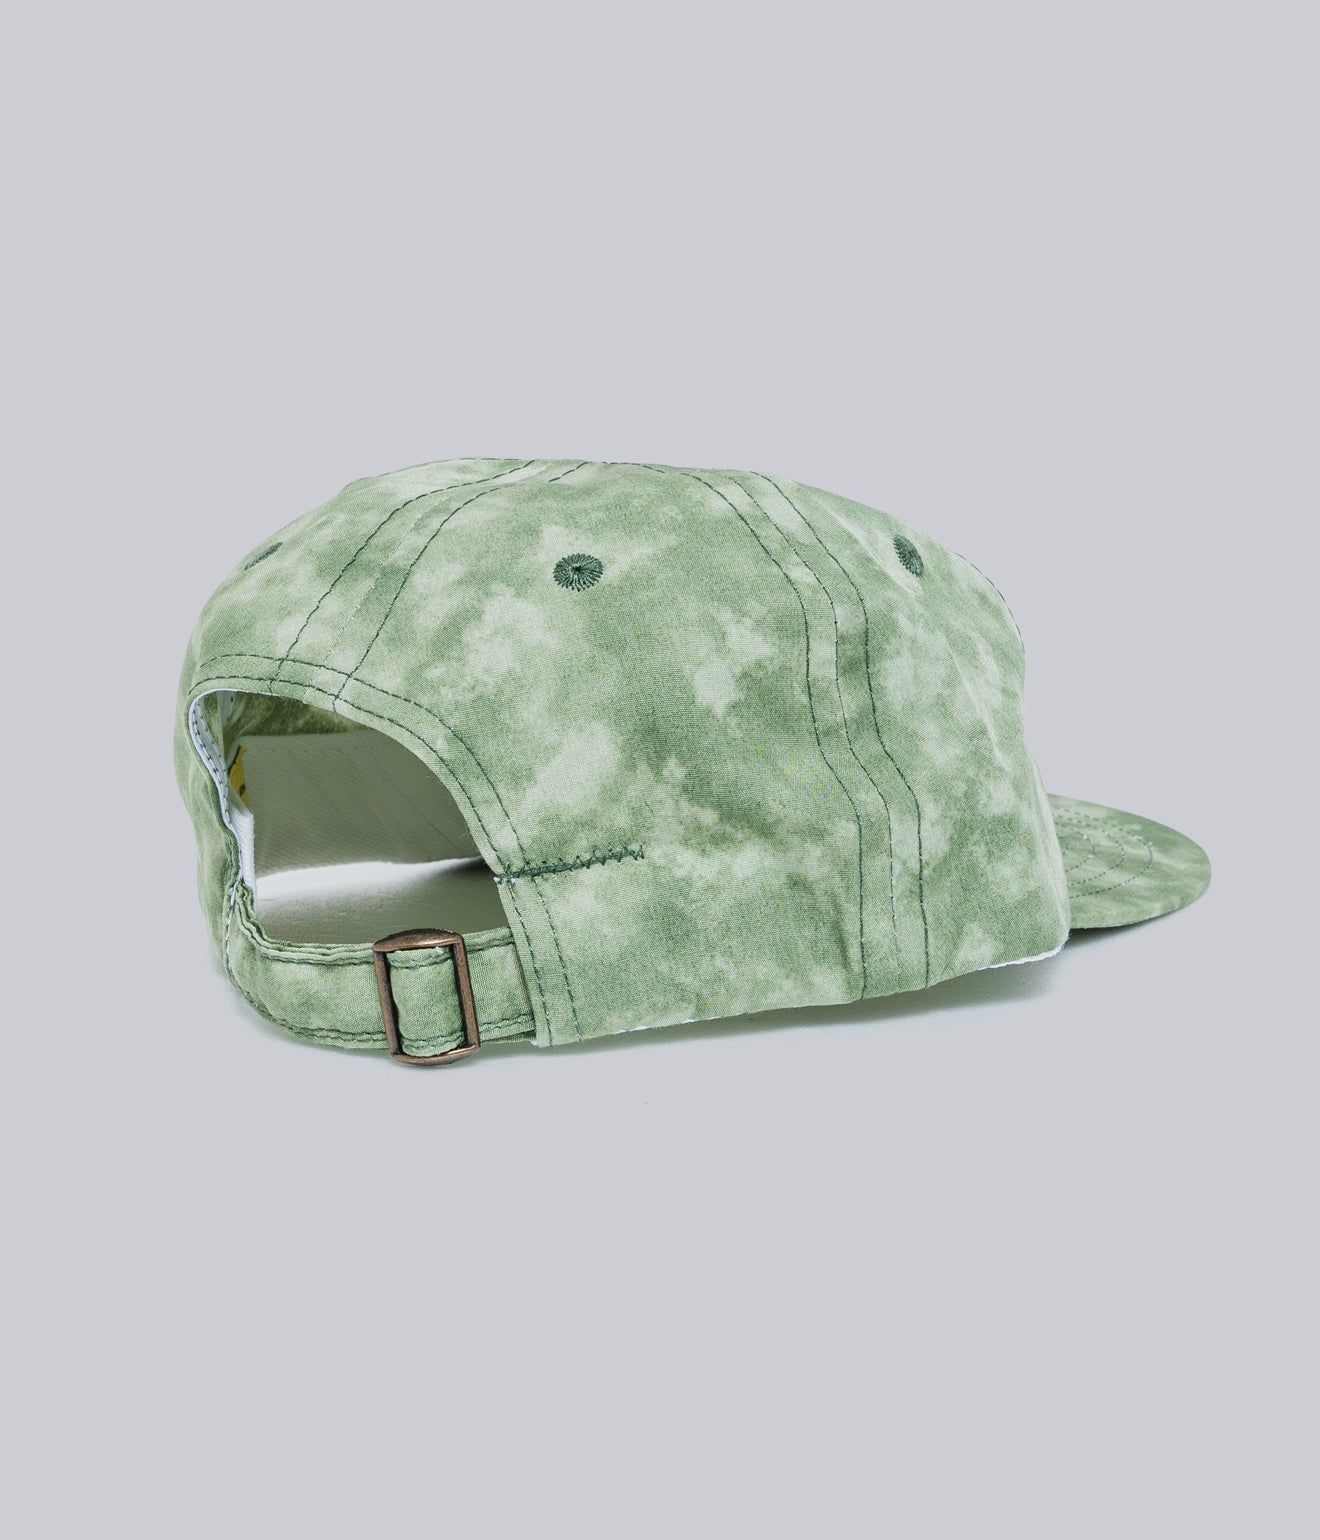 LITE YEAR "Japanese Cotton Twill 6 Panel Cap" Cloudy Washed Green - WEAREALLANIMALS